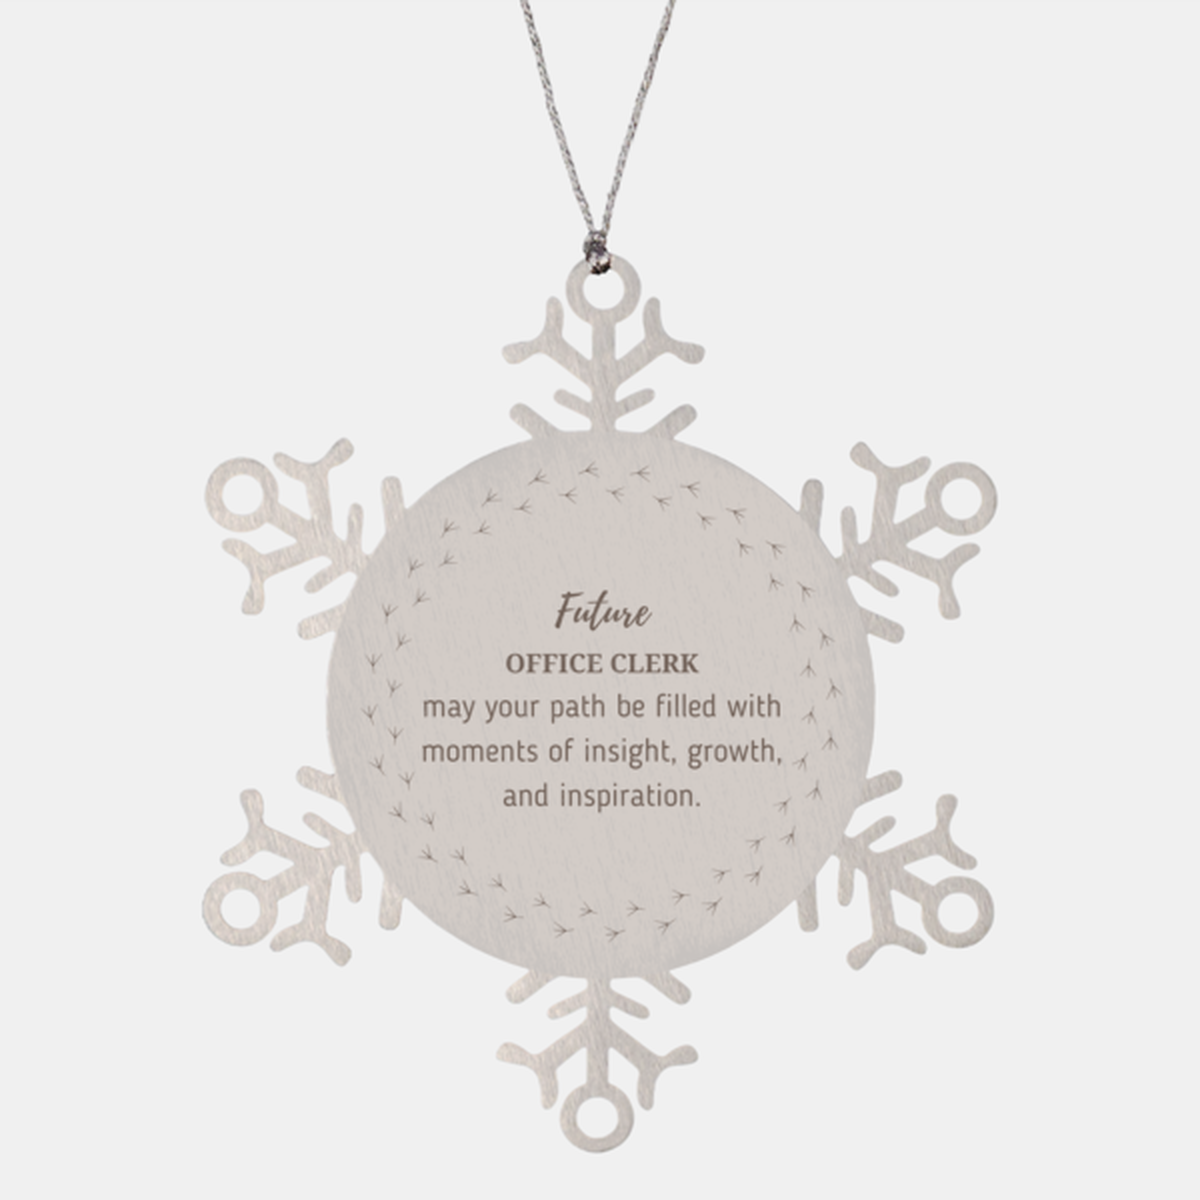 Future Office Clerk Gifts, May your path be filled with moments of insight, Graduation Gifts for New Office Clerk, Christmas Unique Snowflake Ornament For Men, Women, Friends